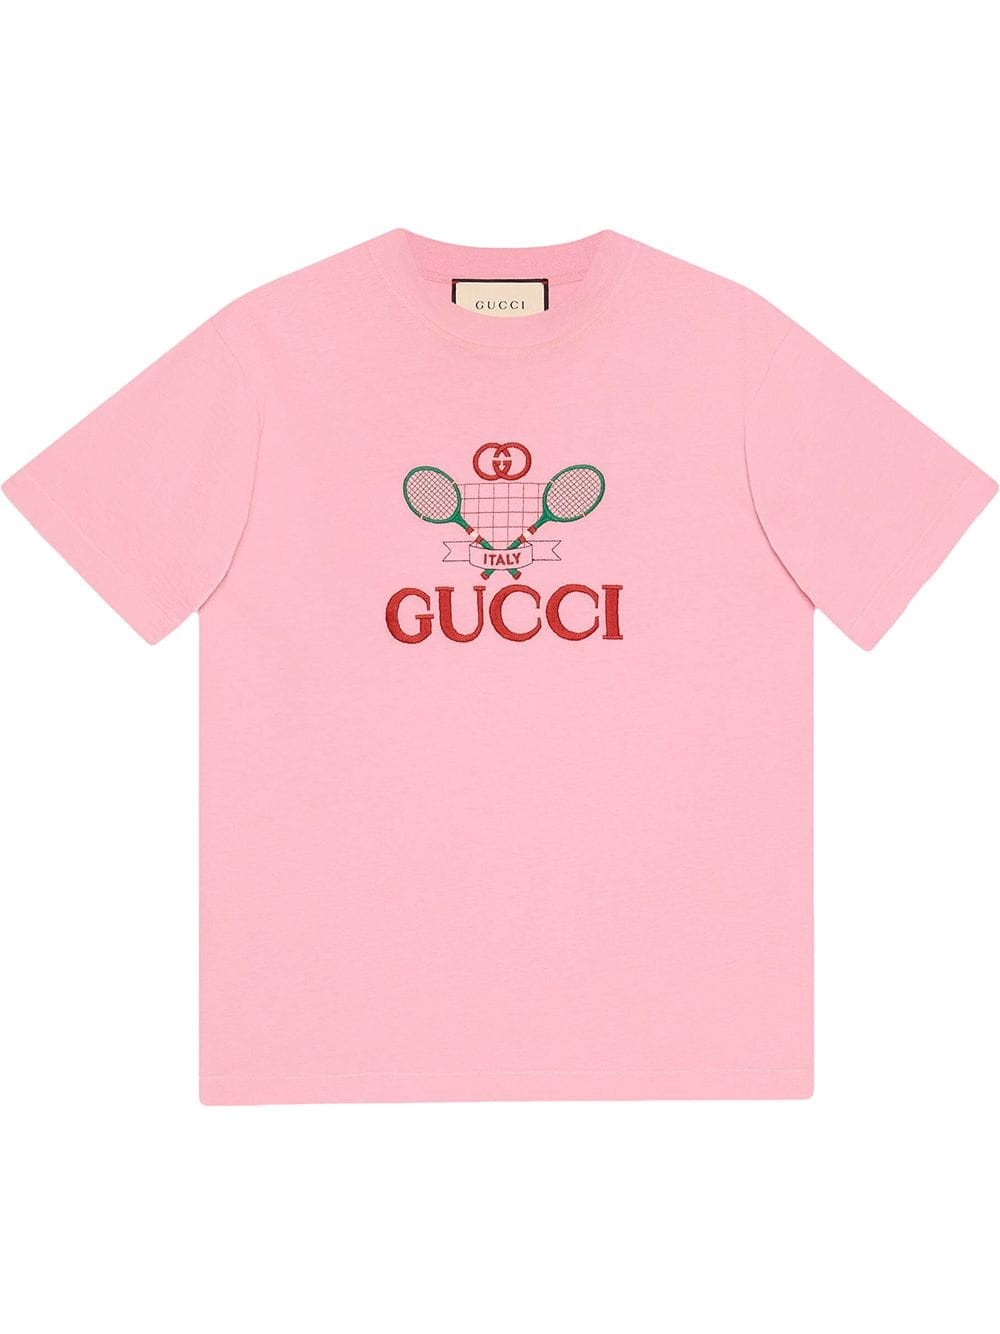 gucci LOGO T-SHIRT available on montiboutique.com - 30283